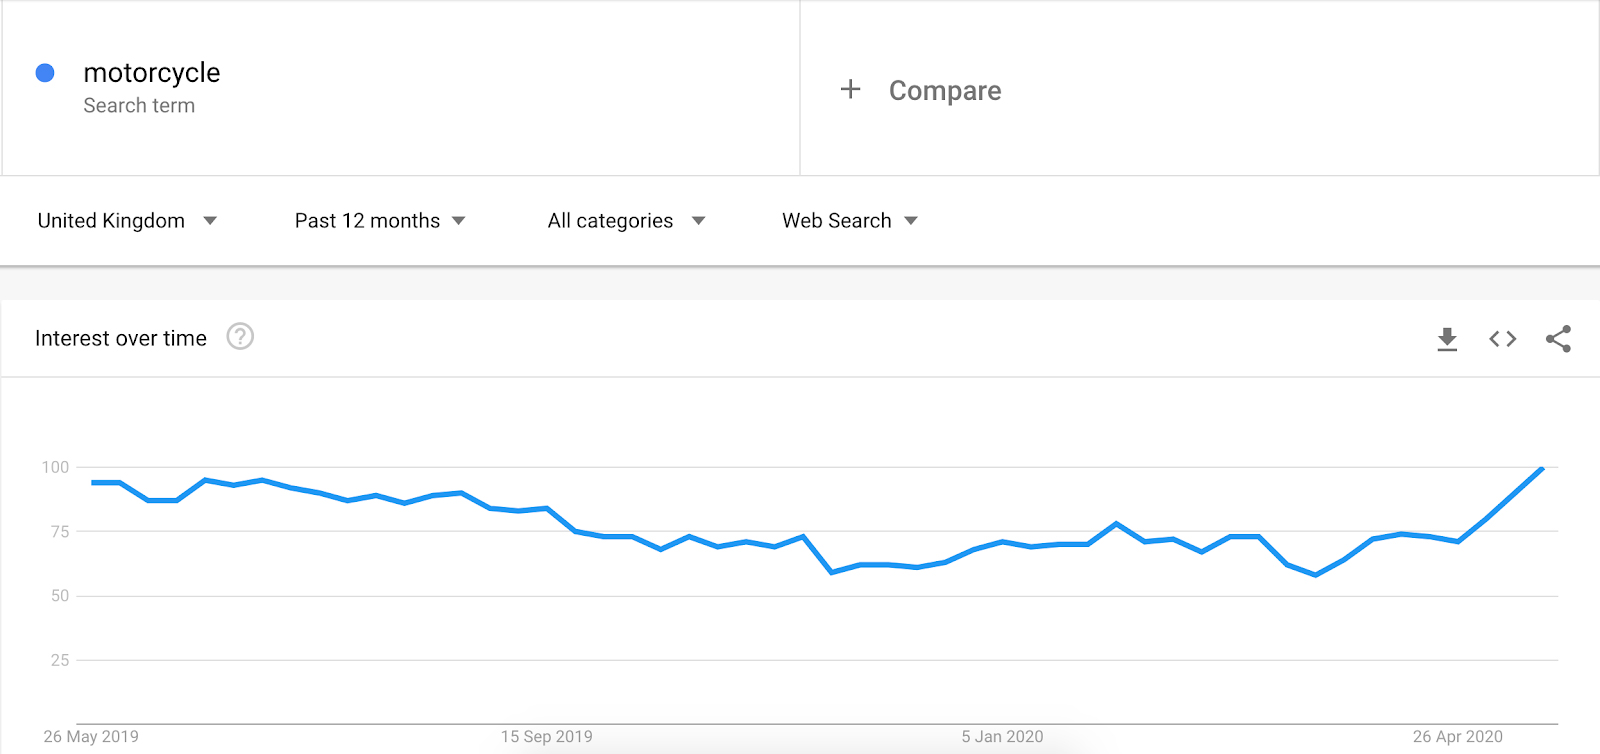 Google Trends data for searches of “motorcycle”